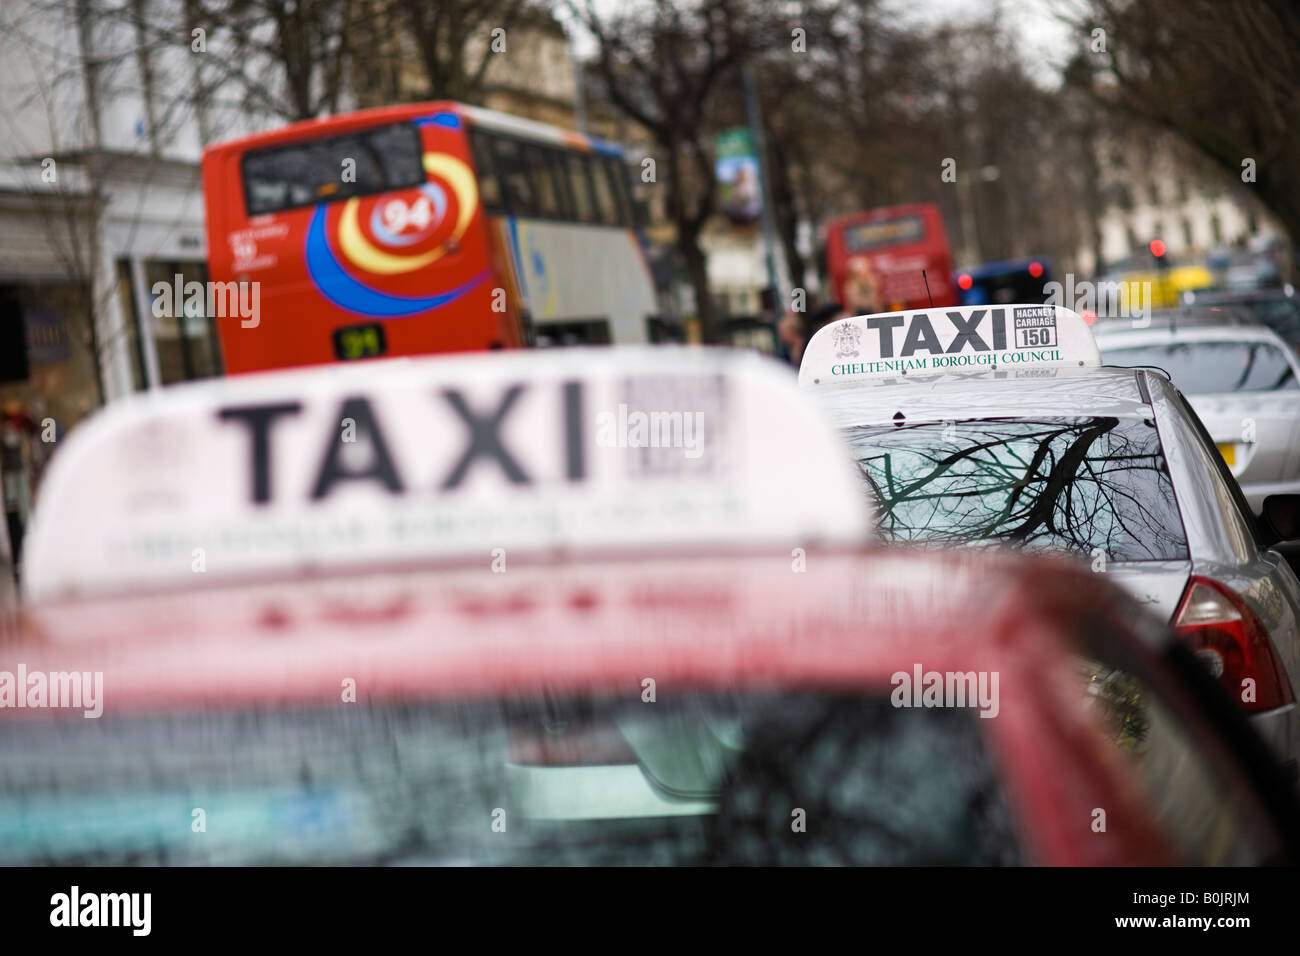 Taxi rank in a town centre, Cheltenham, UK Stock Photo